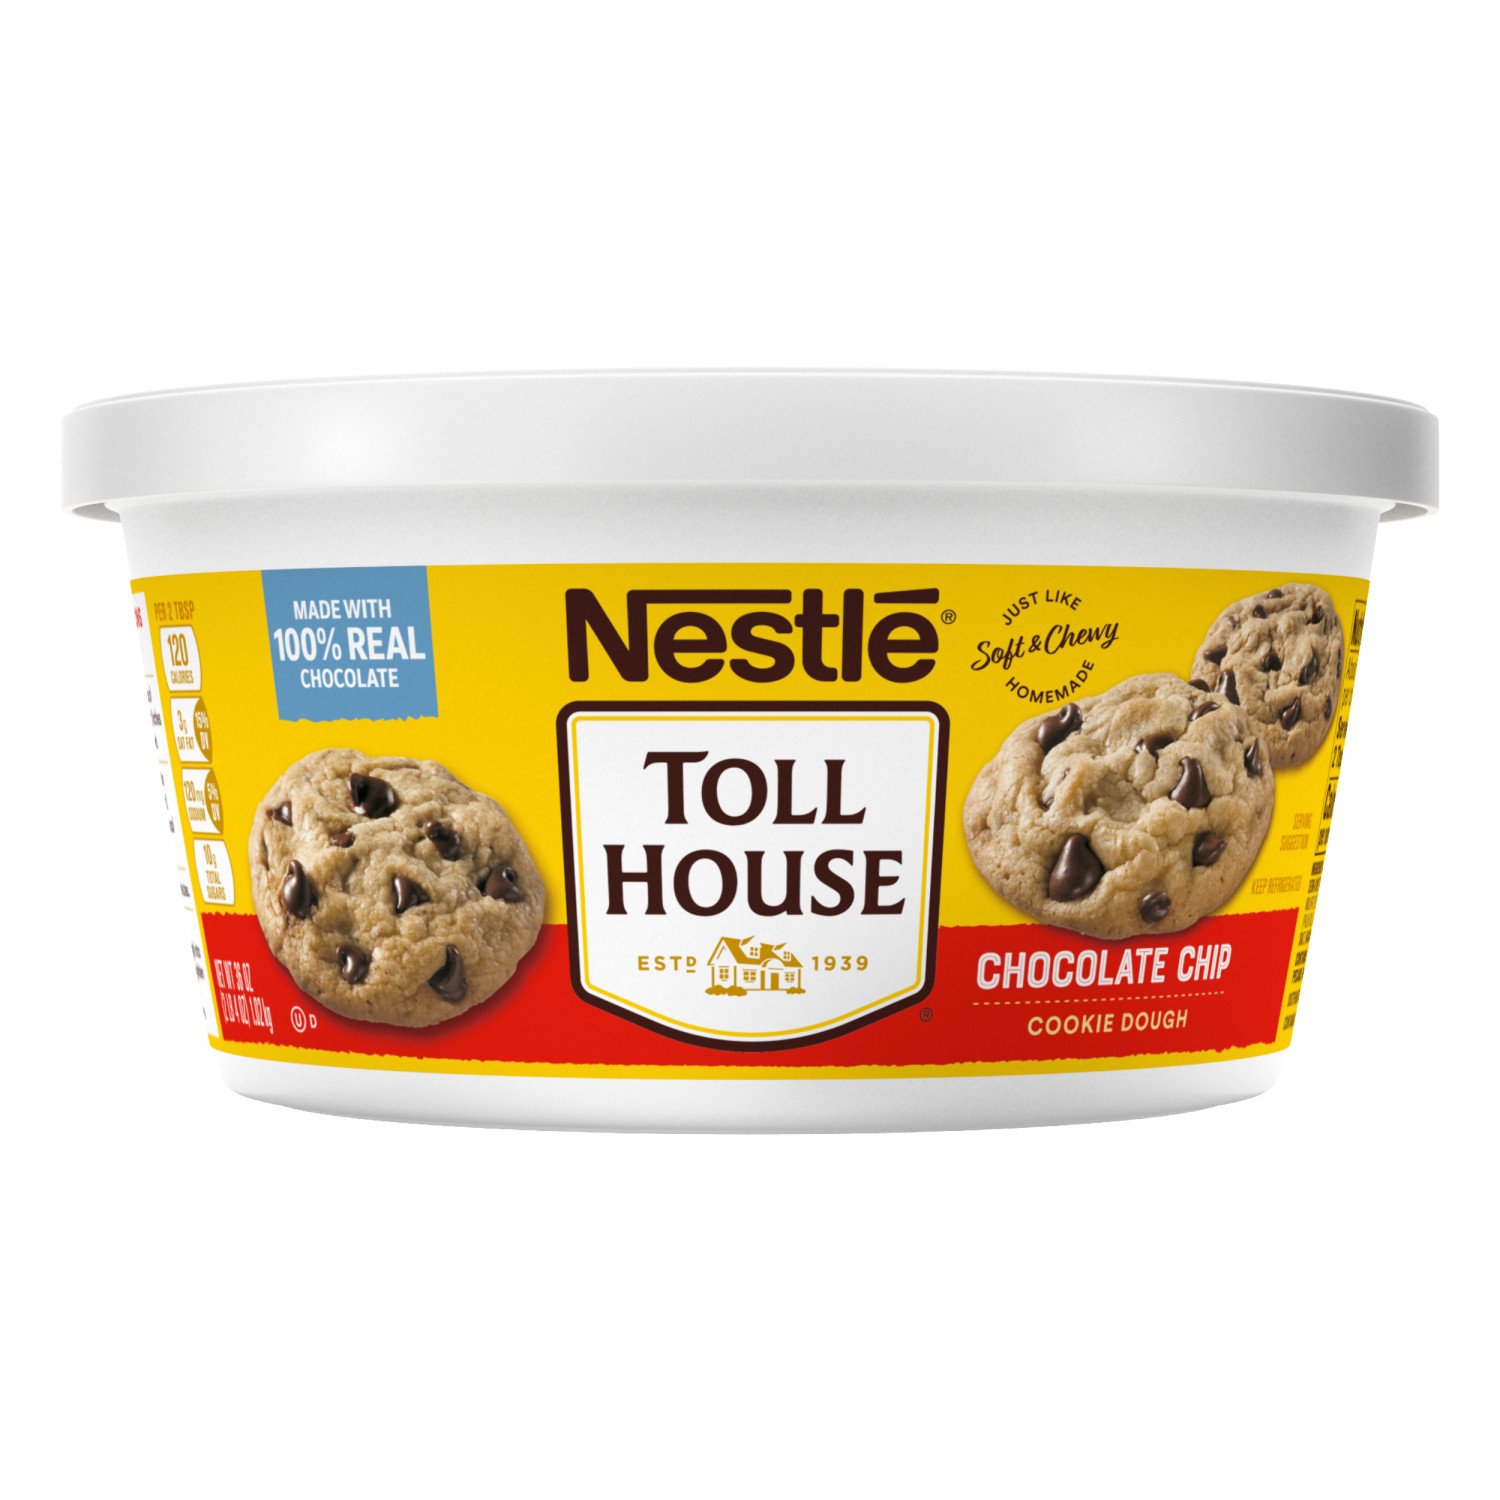 nestle-toll-house-cookie-dough-chocolate-chip-value-size-shop